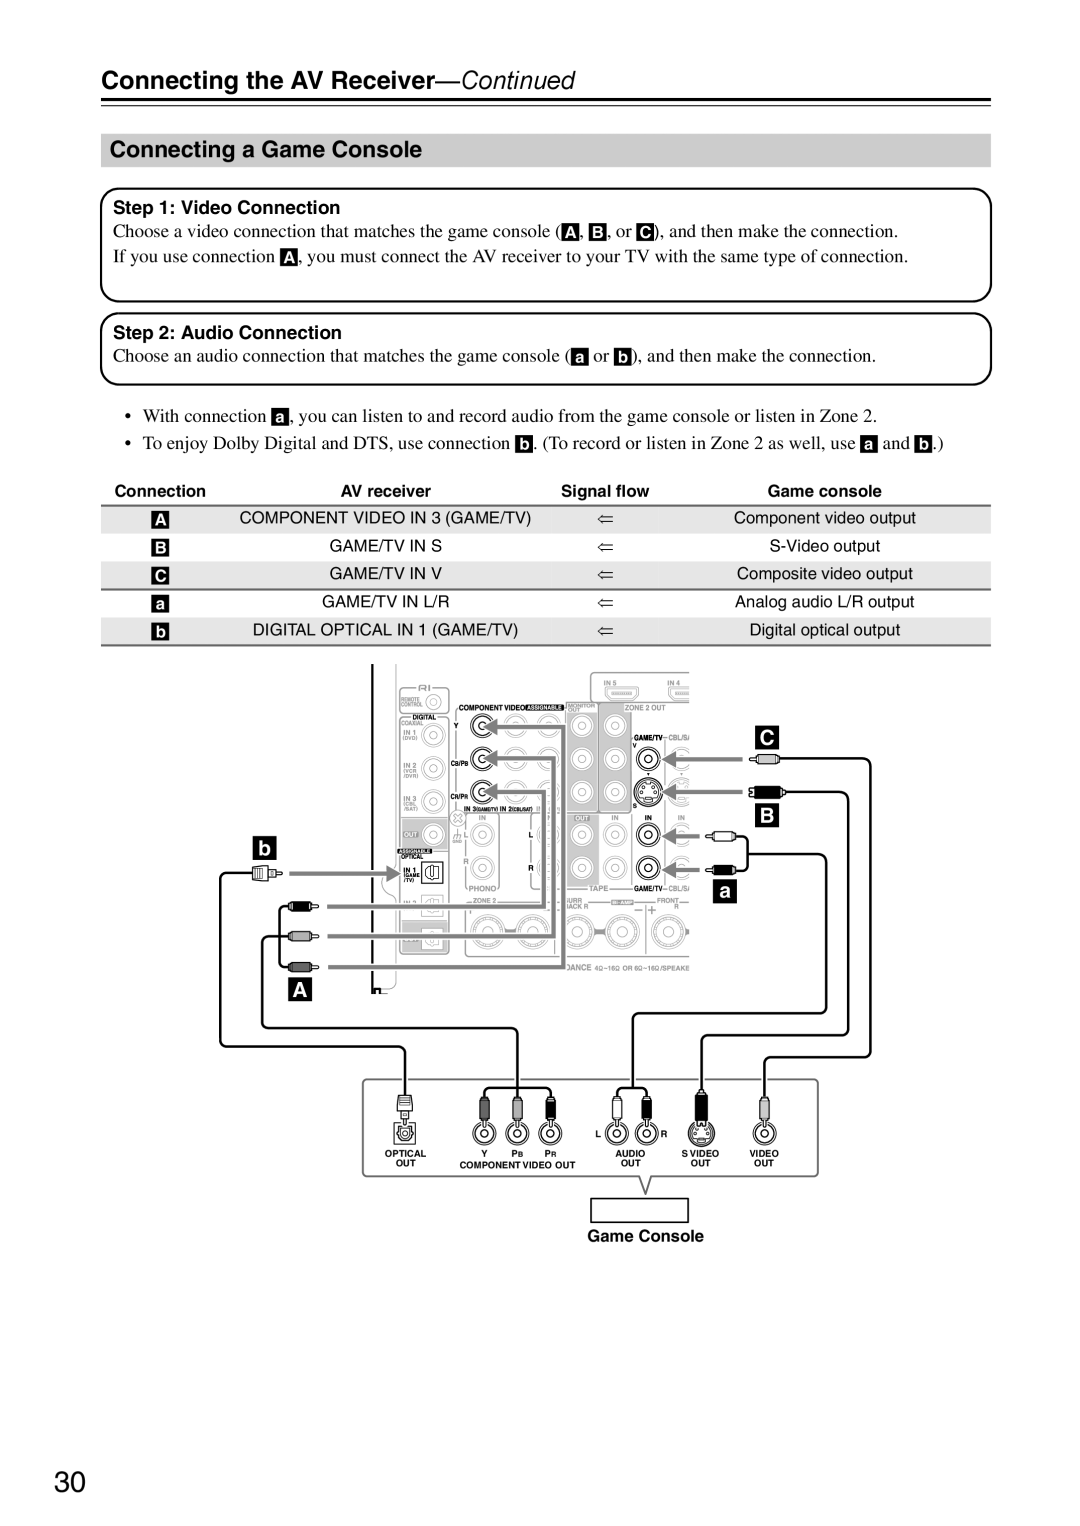 Onkyo DTR-7.9 instruction manual Connecting a Game Console, C B b a A, Connecting the AV Receiver—Continued 